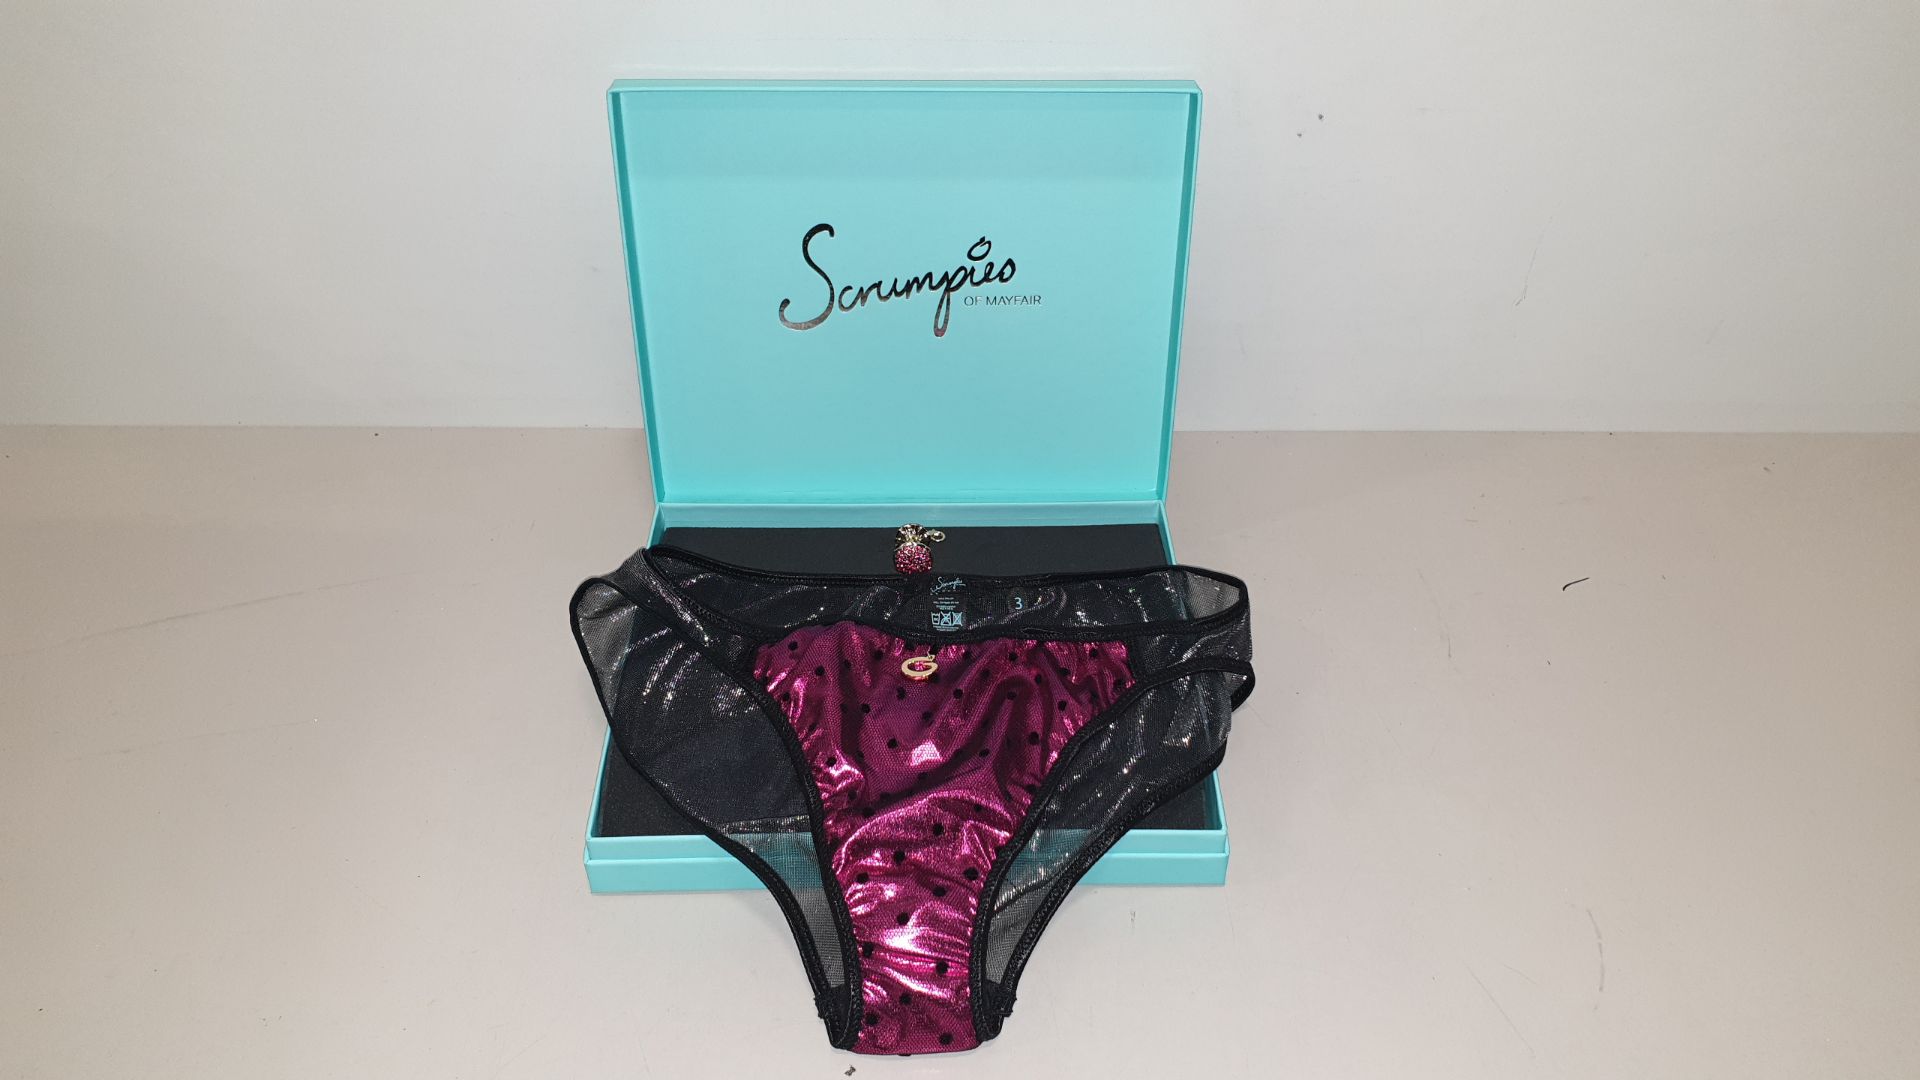 50 X SCRUMPIES OF MAYFAIR PINK LADY TANGA BRIEFS - SIZES 8-16 (1-5) 10 OF EACH WITH BAG OF 50 CHARMS